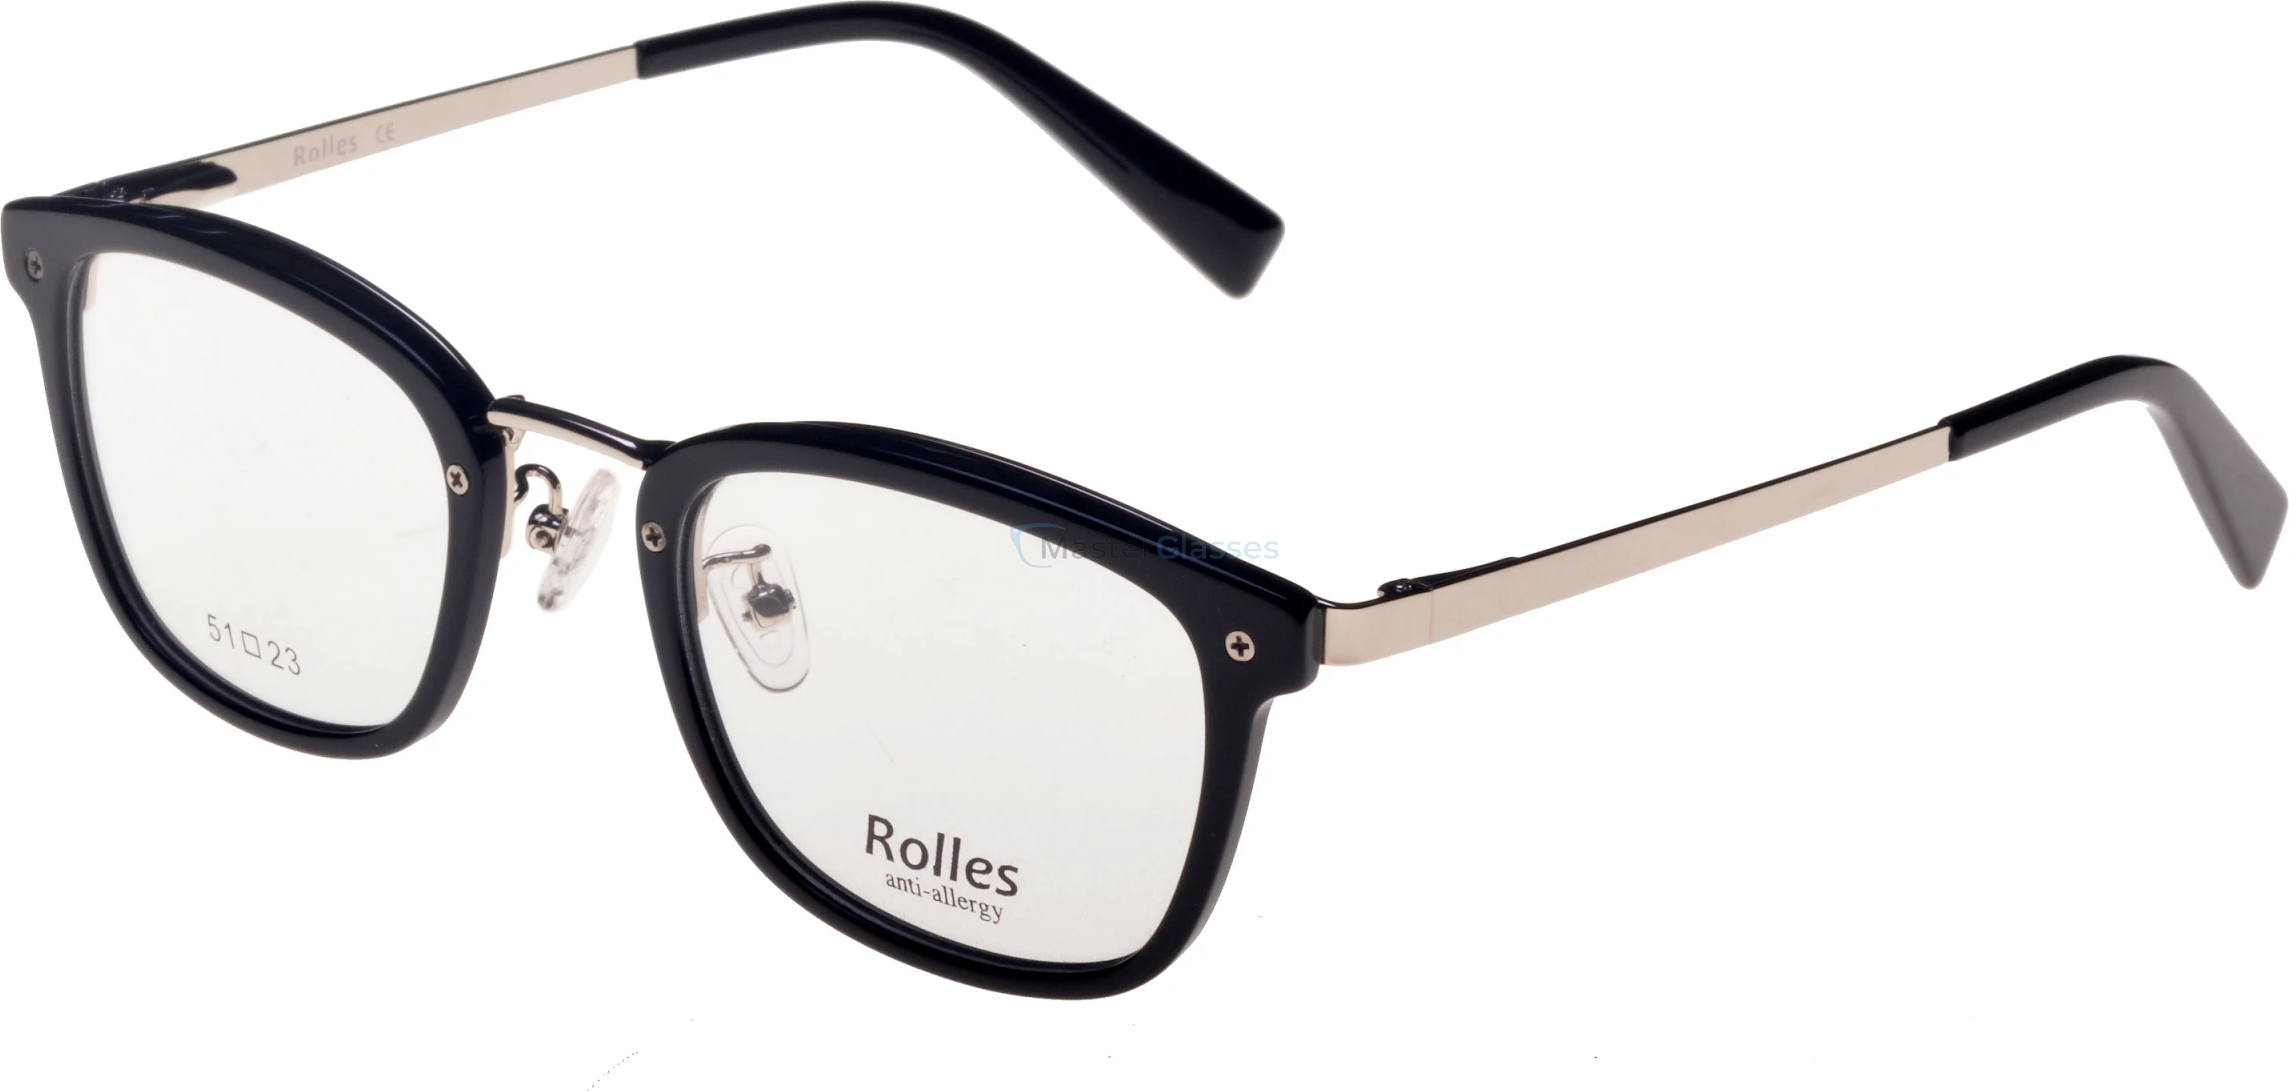  Rolles 599 01